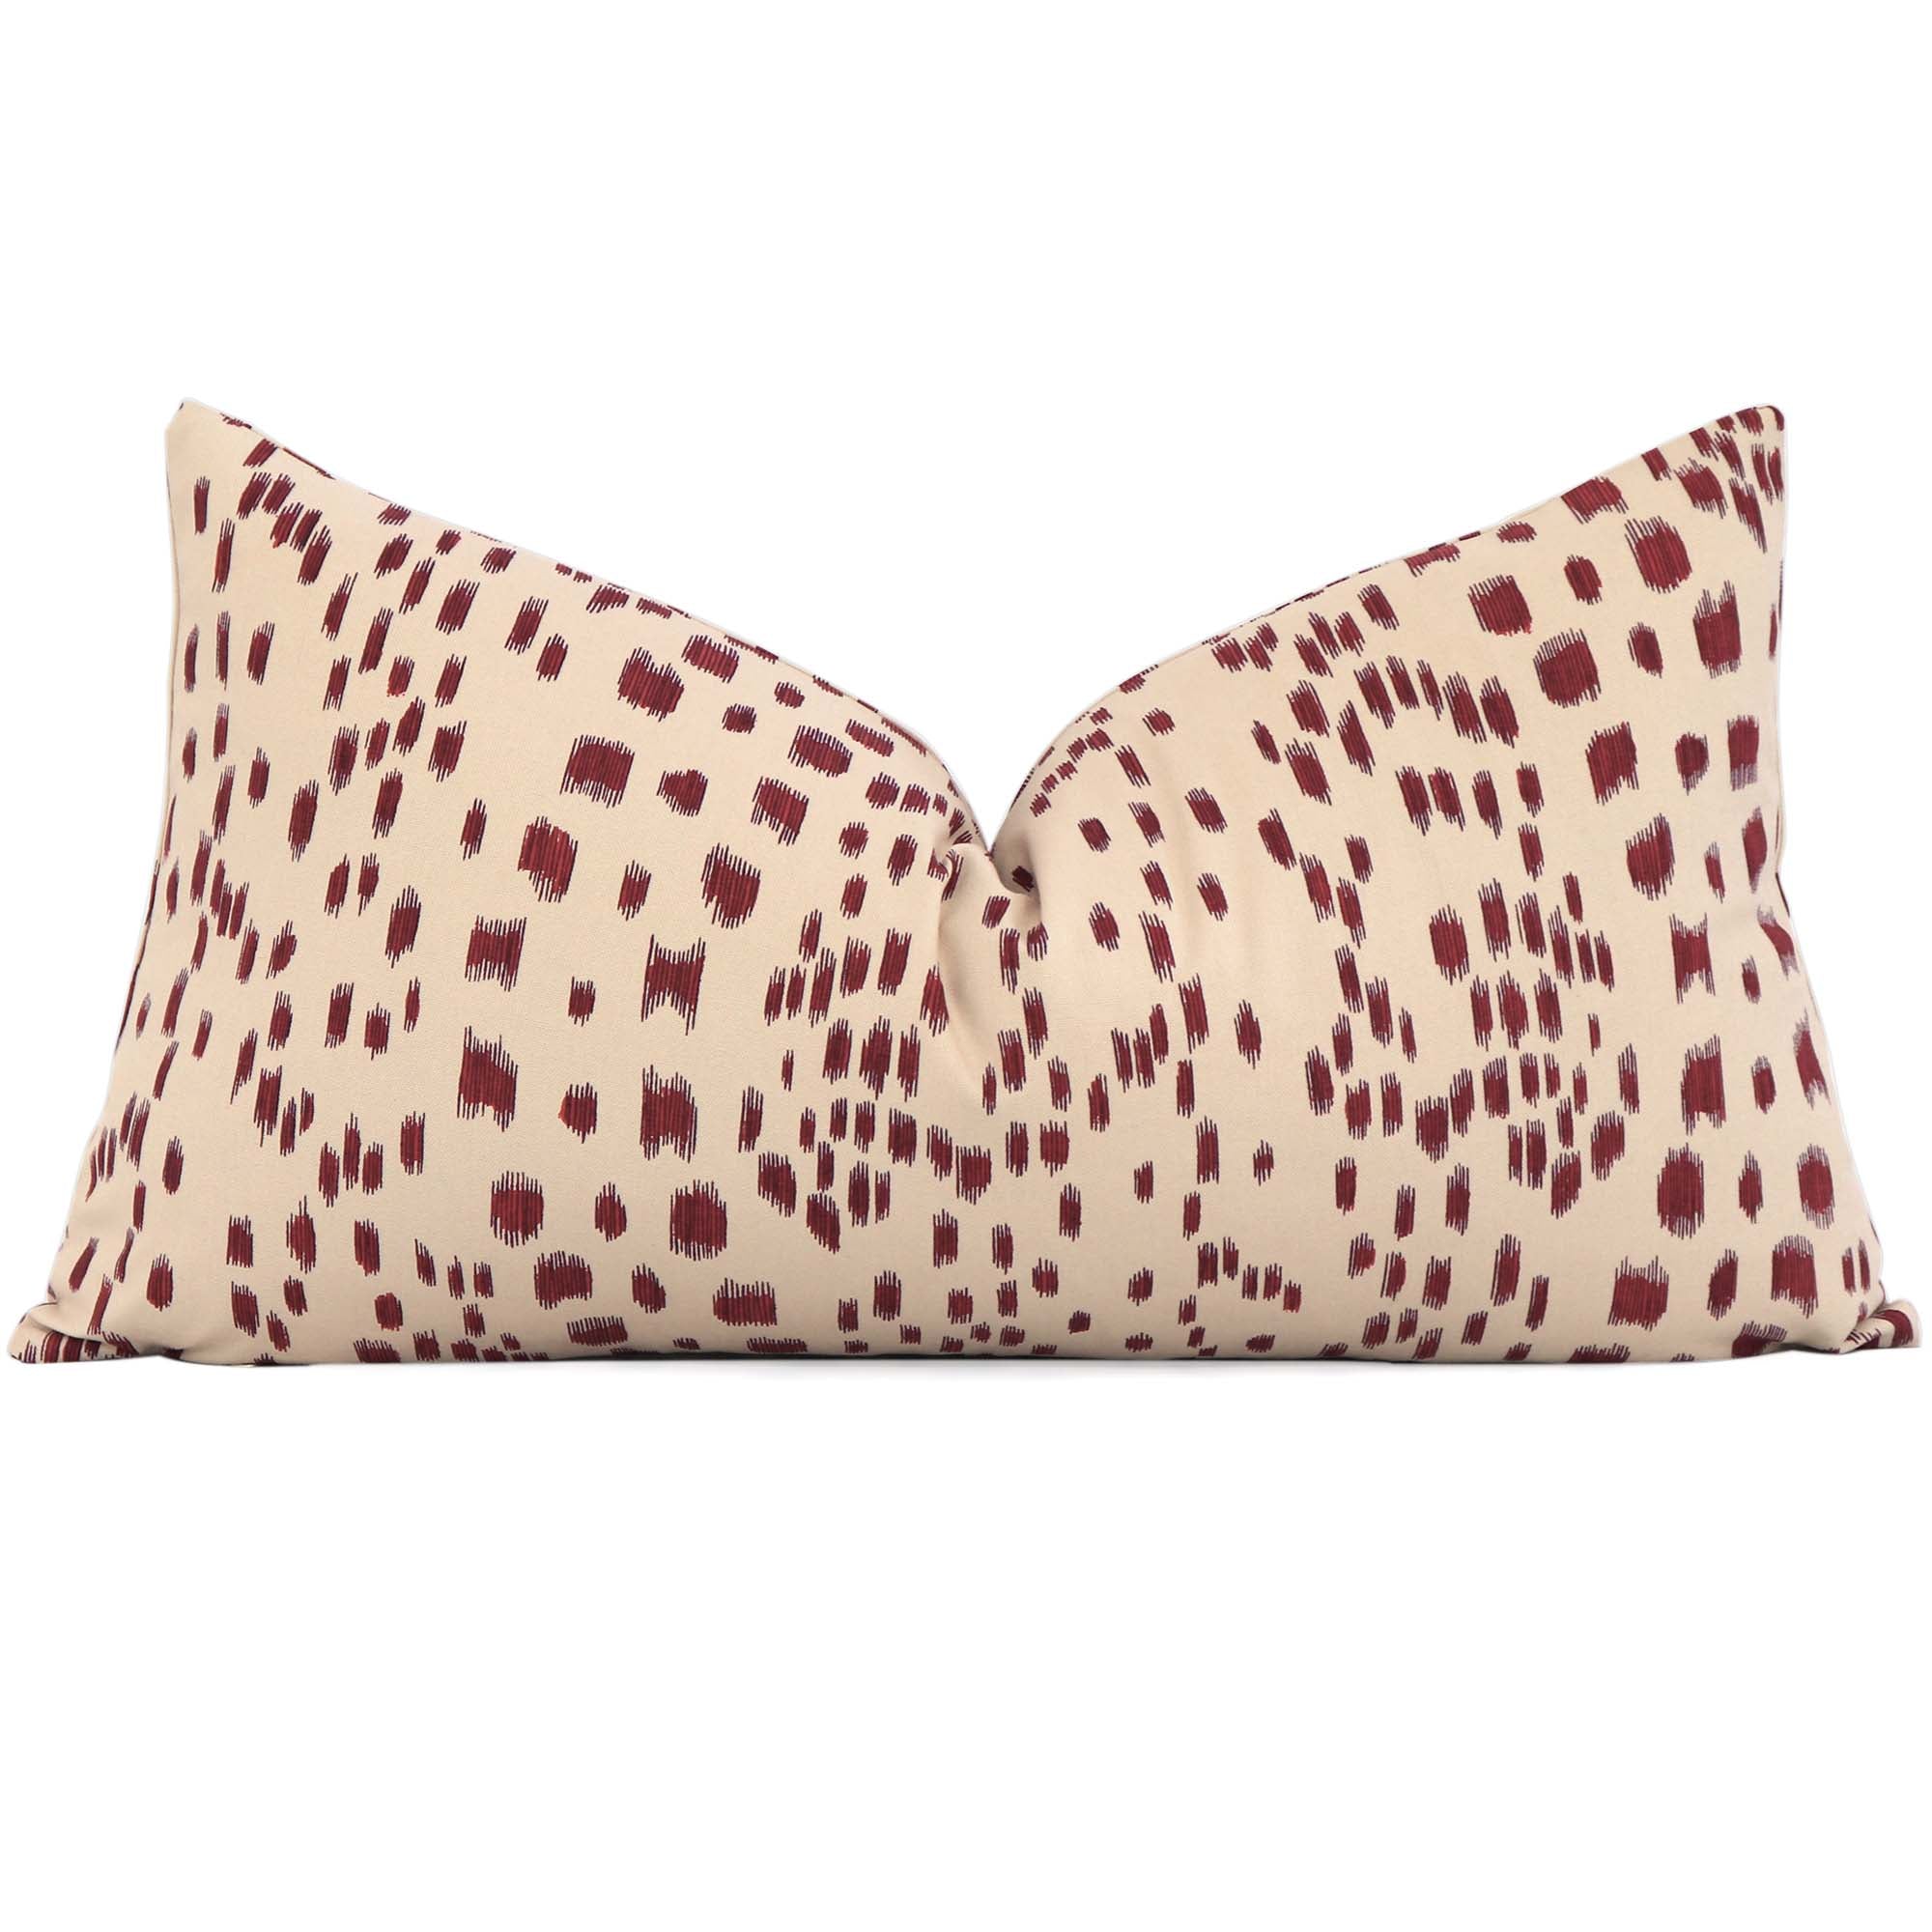 Luxe Brunschwig Fils Les Touches Bordeaux Red Throw Pillow - Chloe & Olive